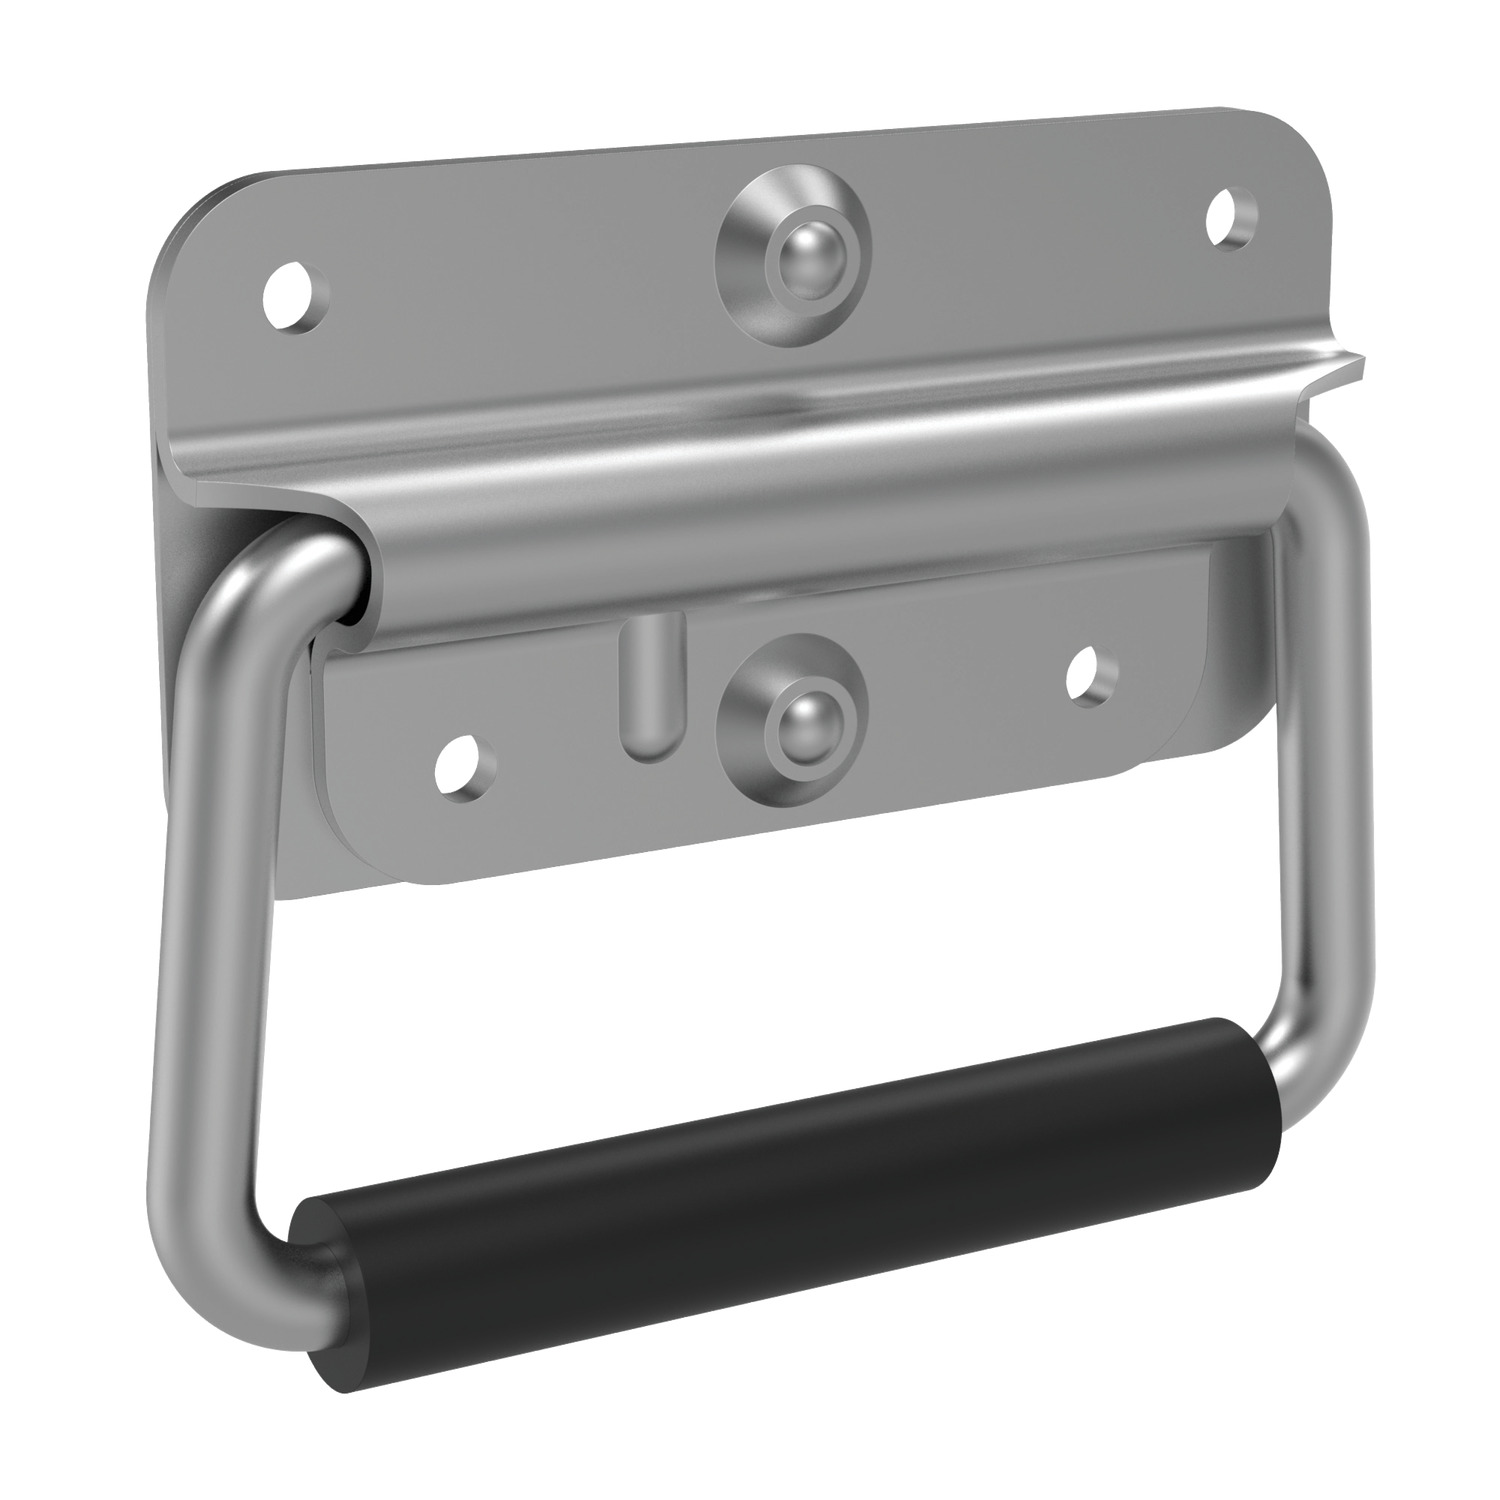 79586.W0004 Spring-Loaded Handles Zinc plated steel - 100mm - 120 DISCONTINUED - AVAILABLE WHILE STOCKS LAST